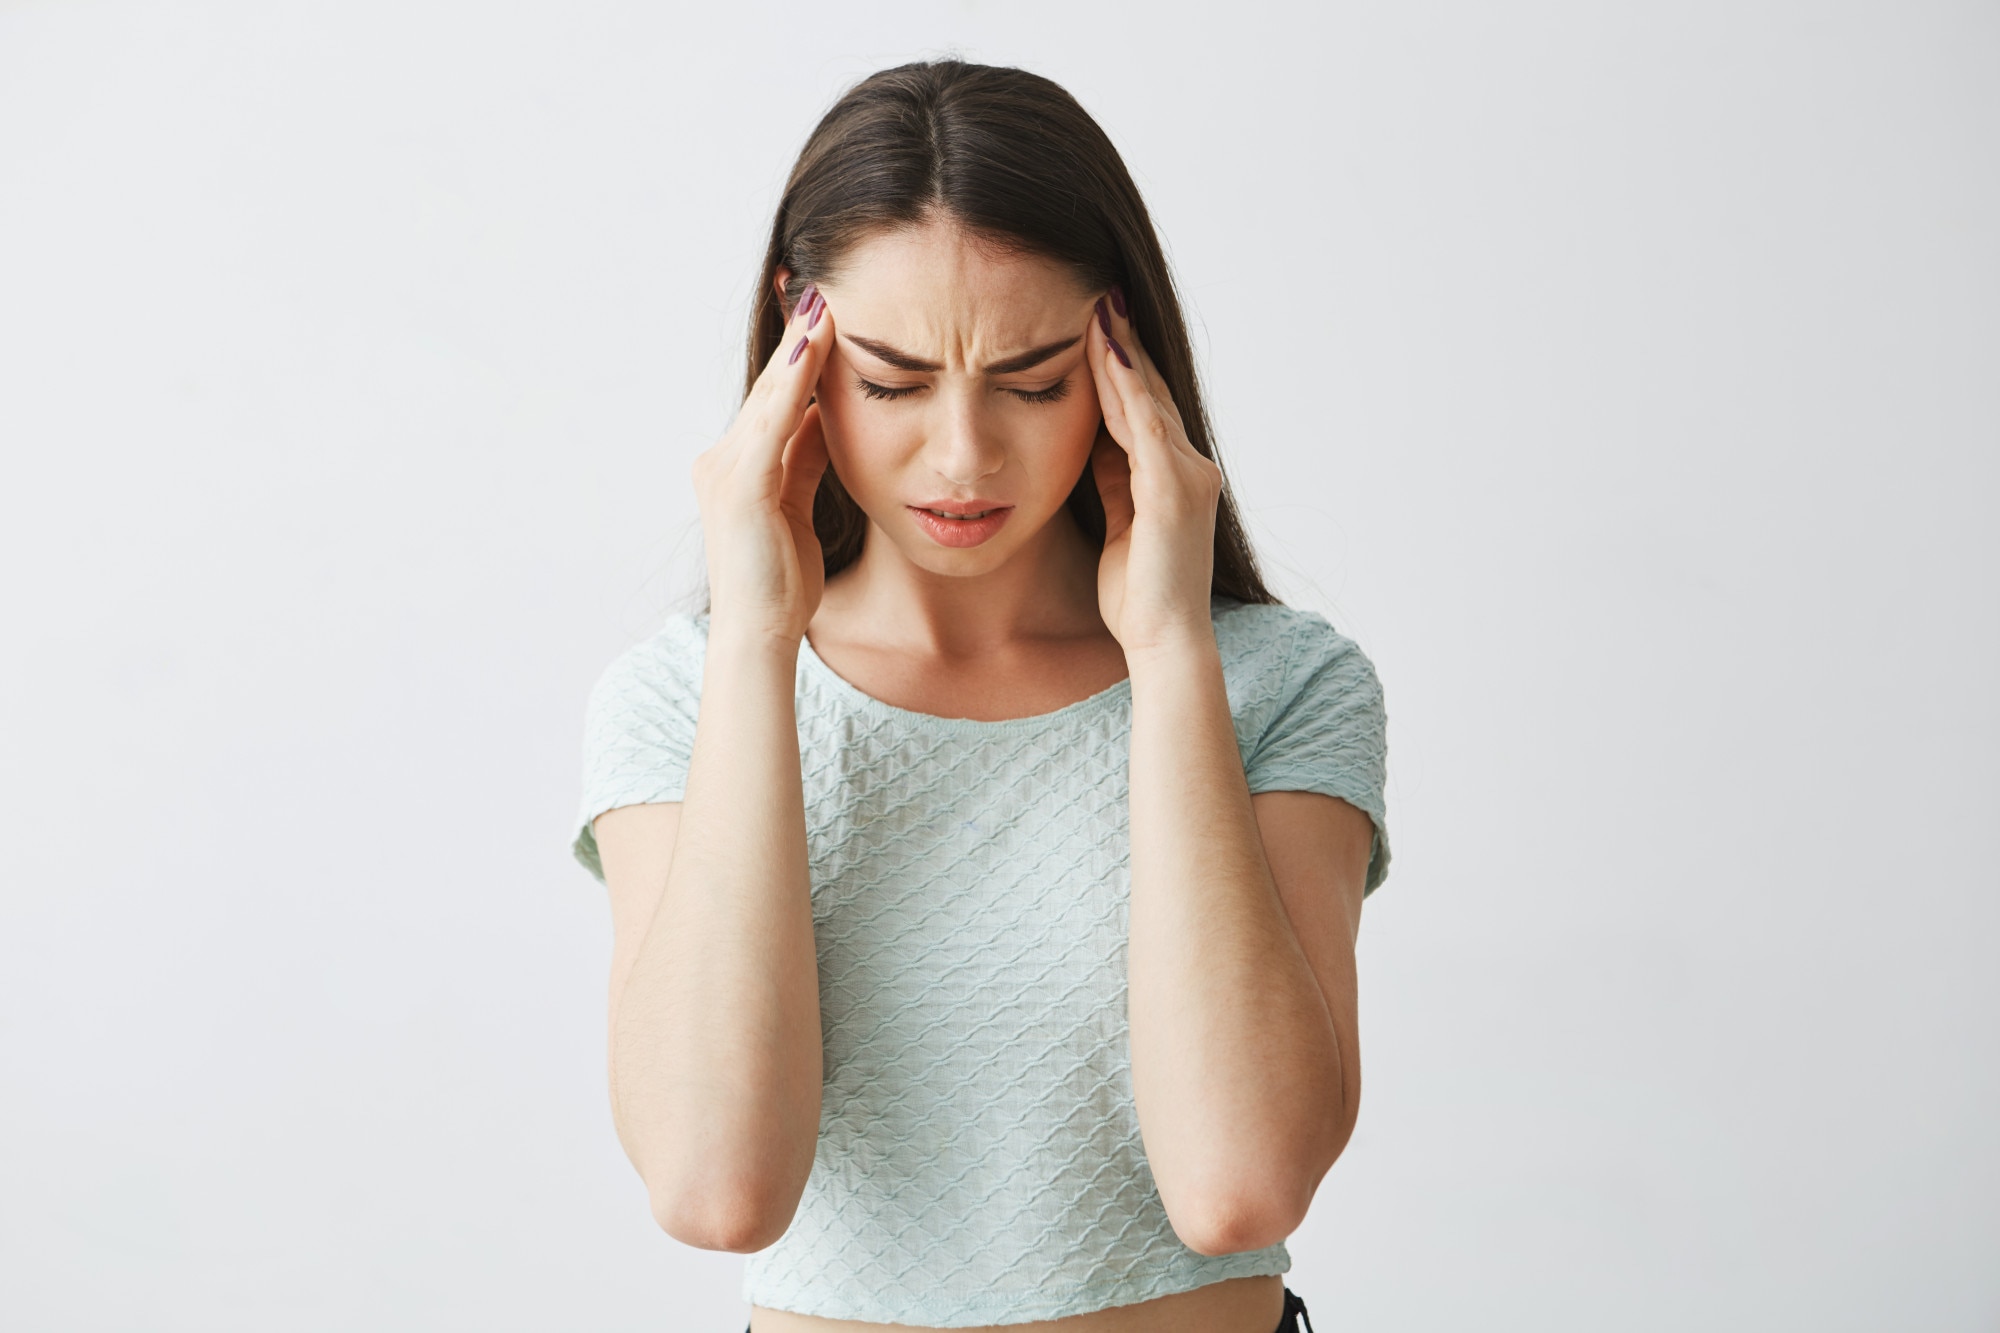 How To Deal With Migraines? Causes, Symptoms, and Possible Fixes